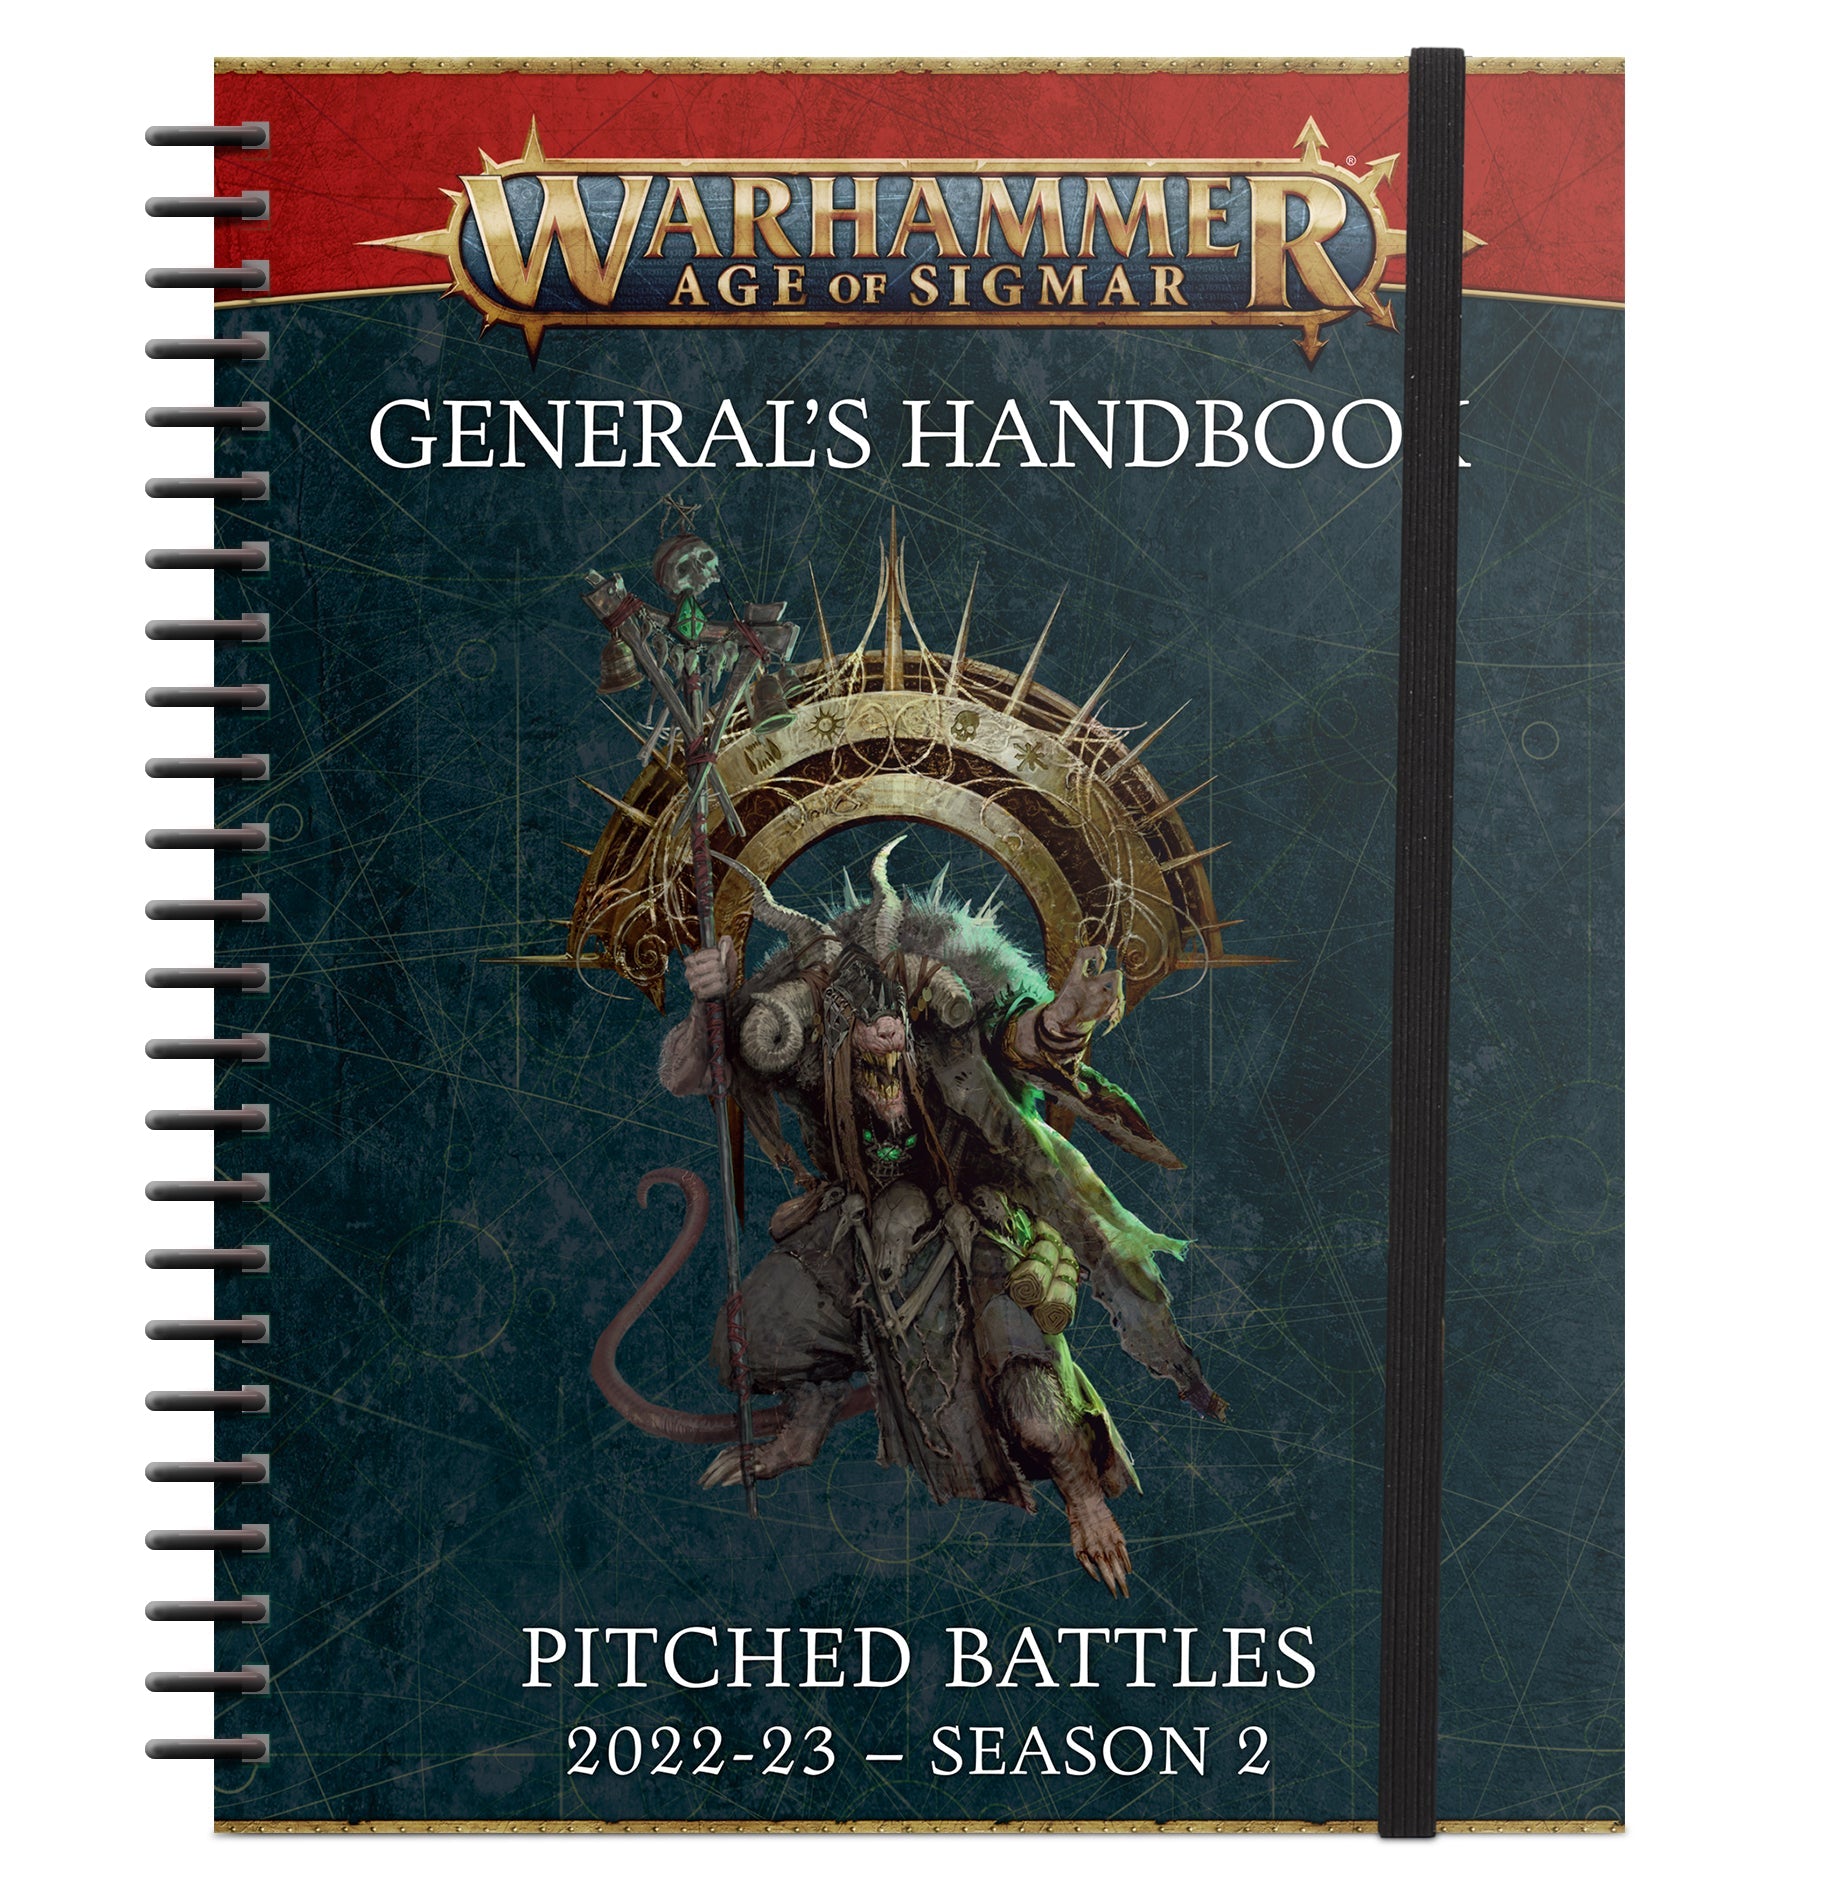 Age of Sigmar: General's Handbook - Pitched Battles 2022-23 Season 2 - Gamescape